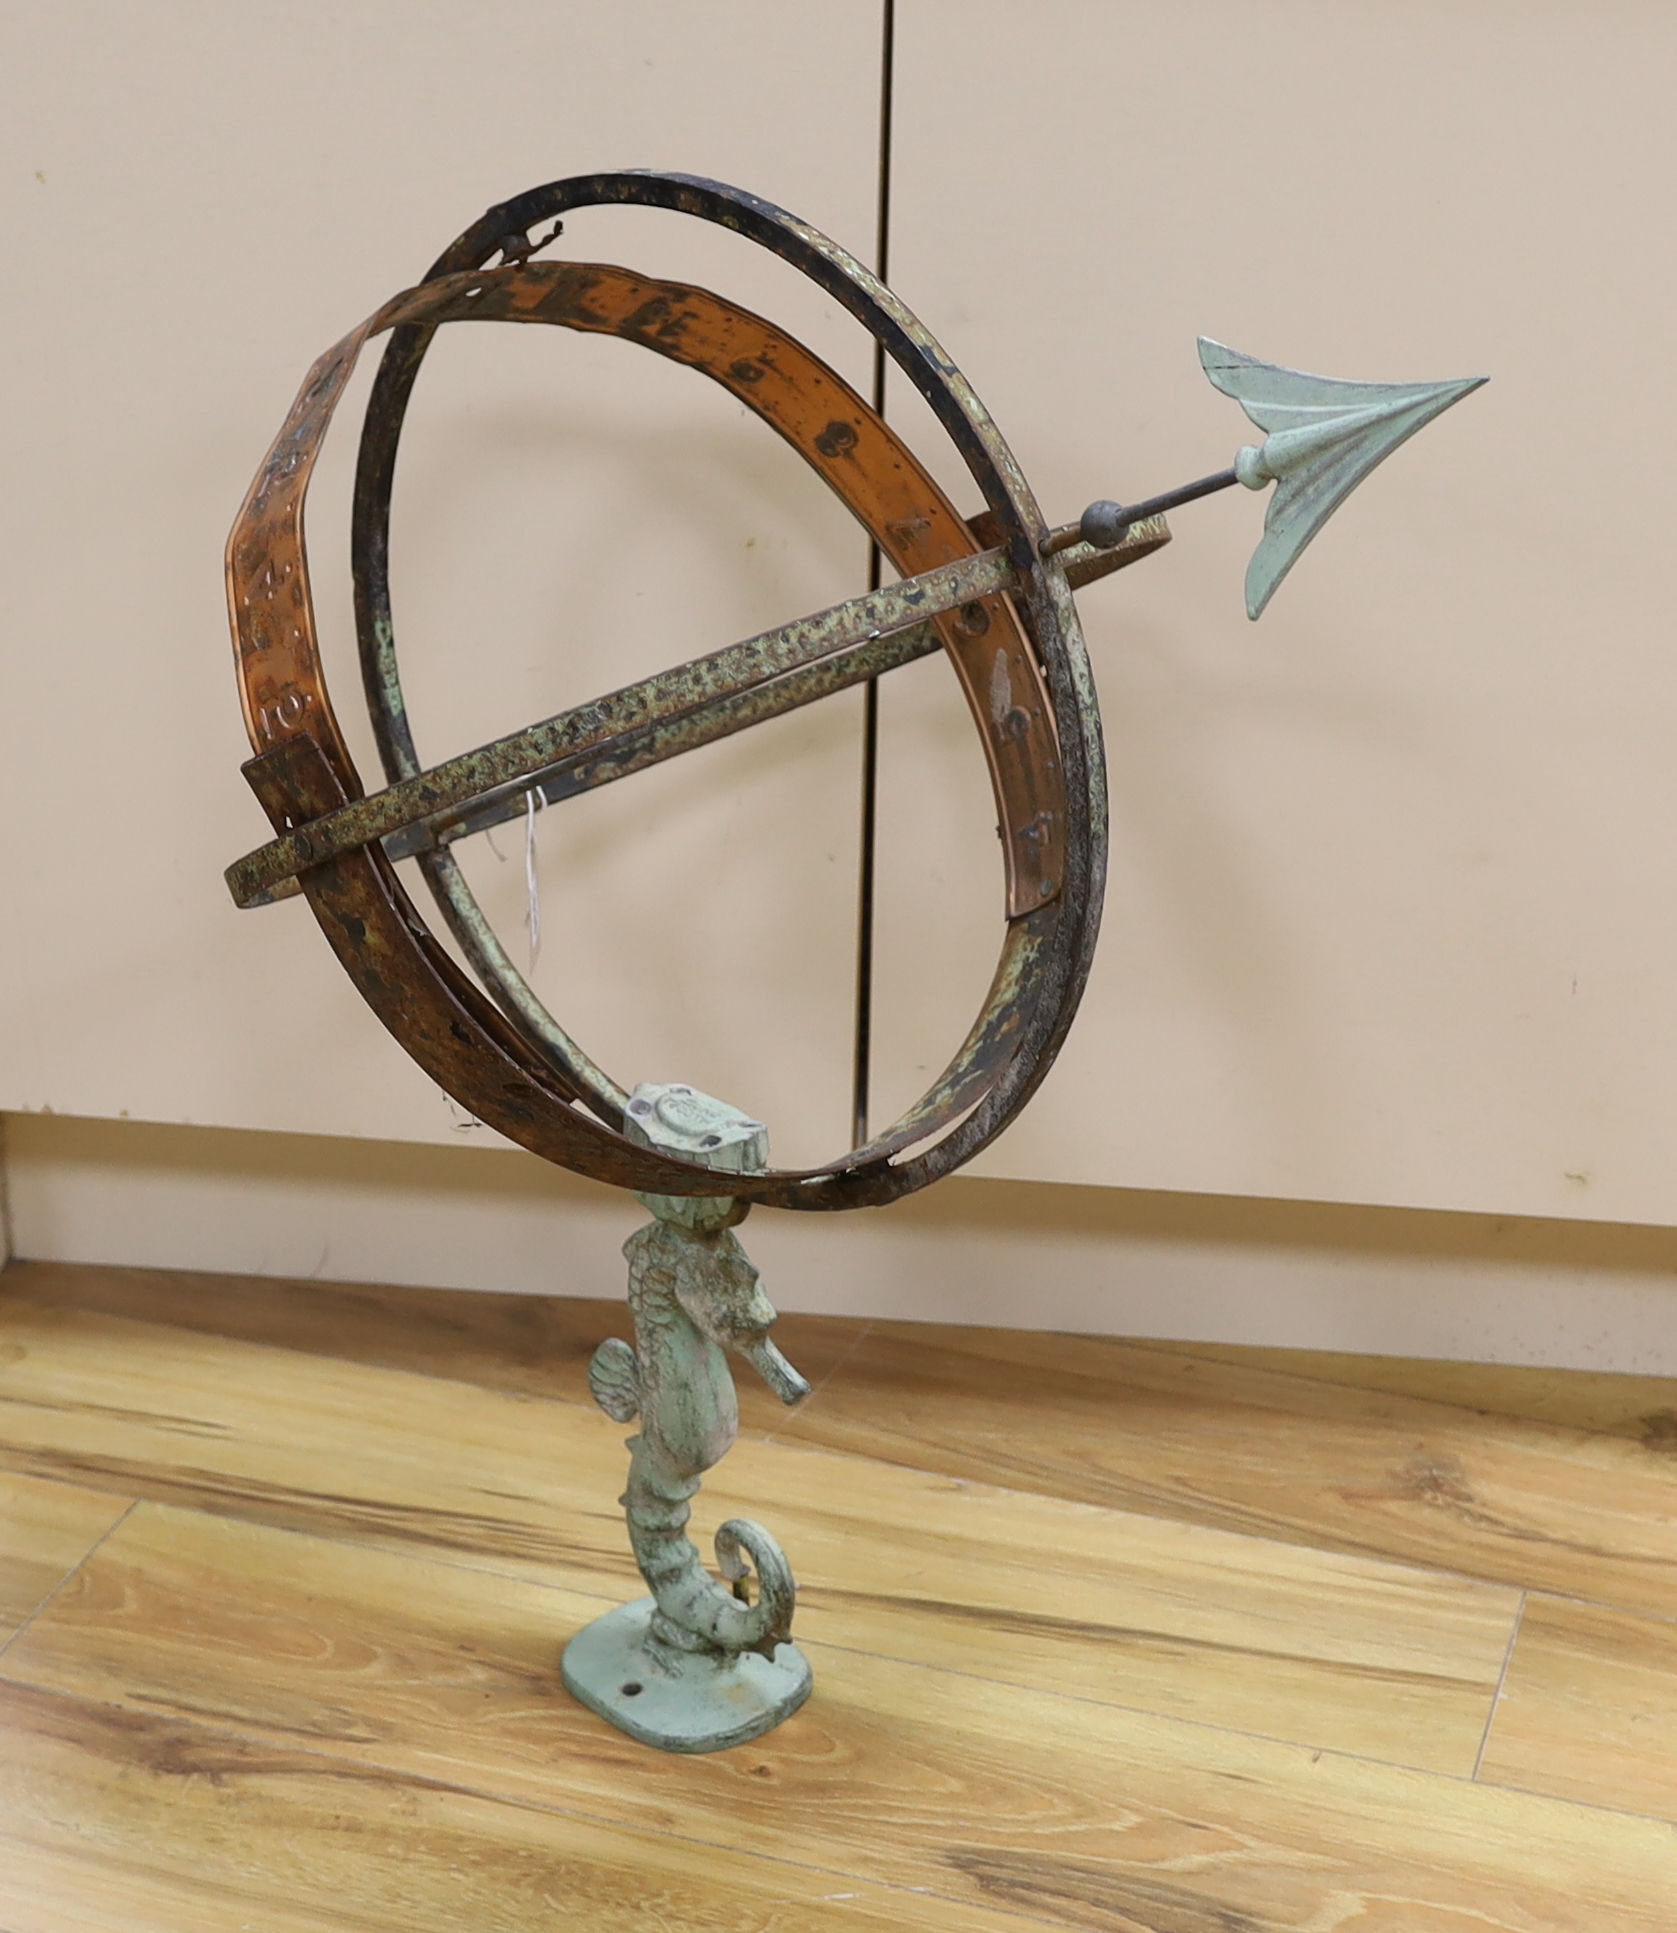 A copper and iron Armillary sphere, 55cm high